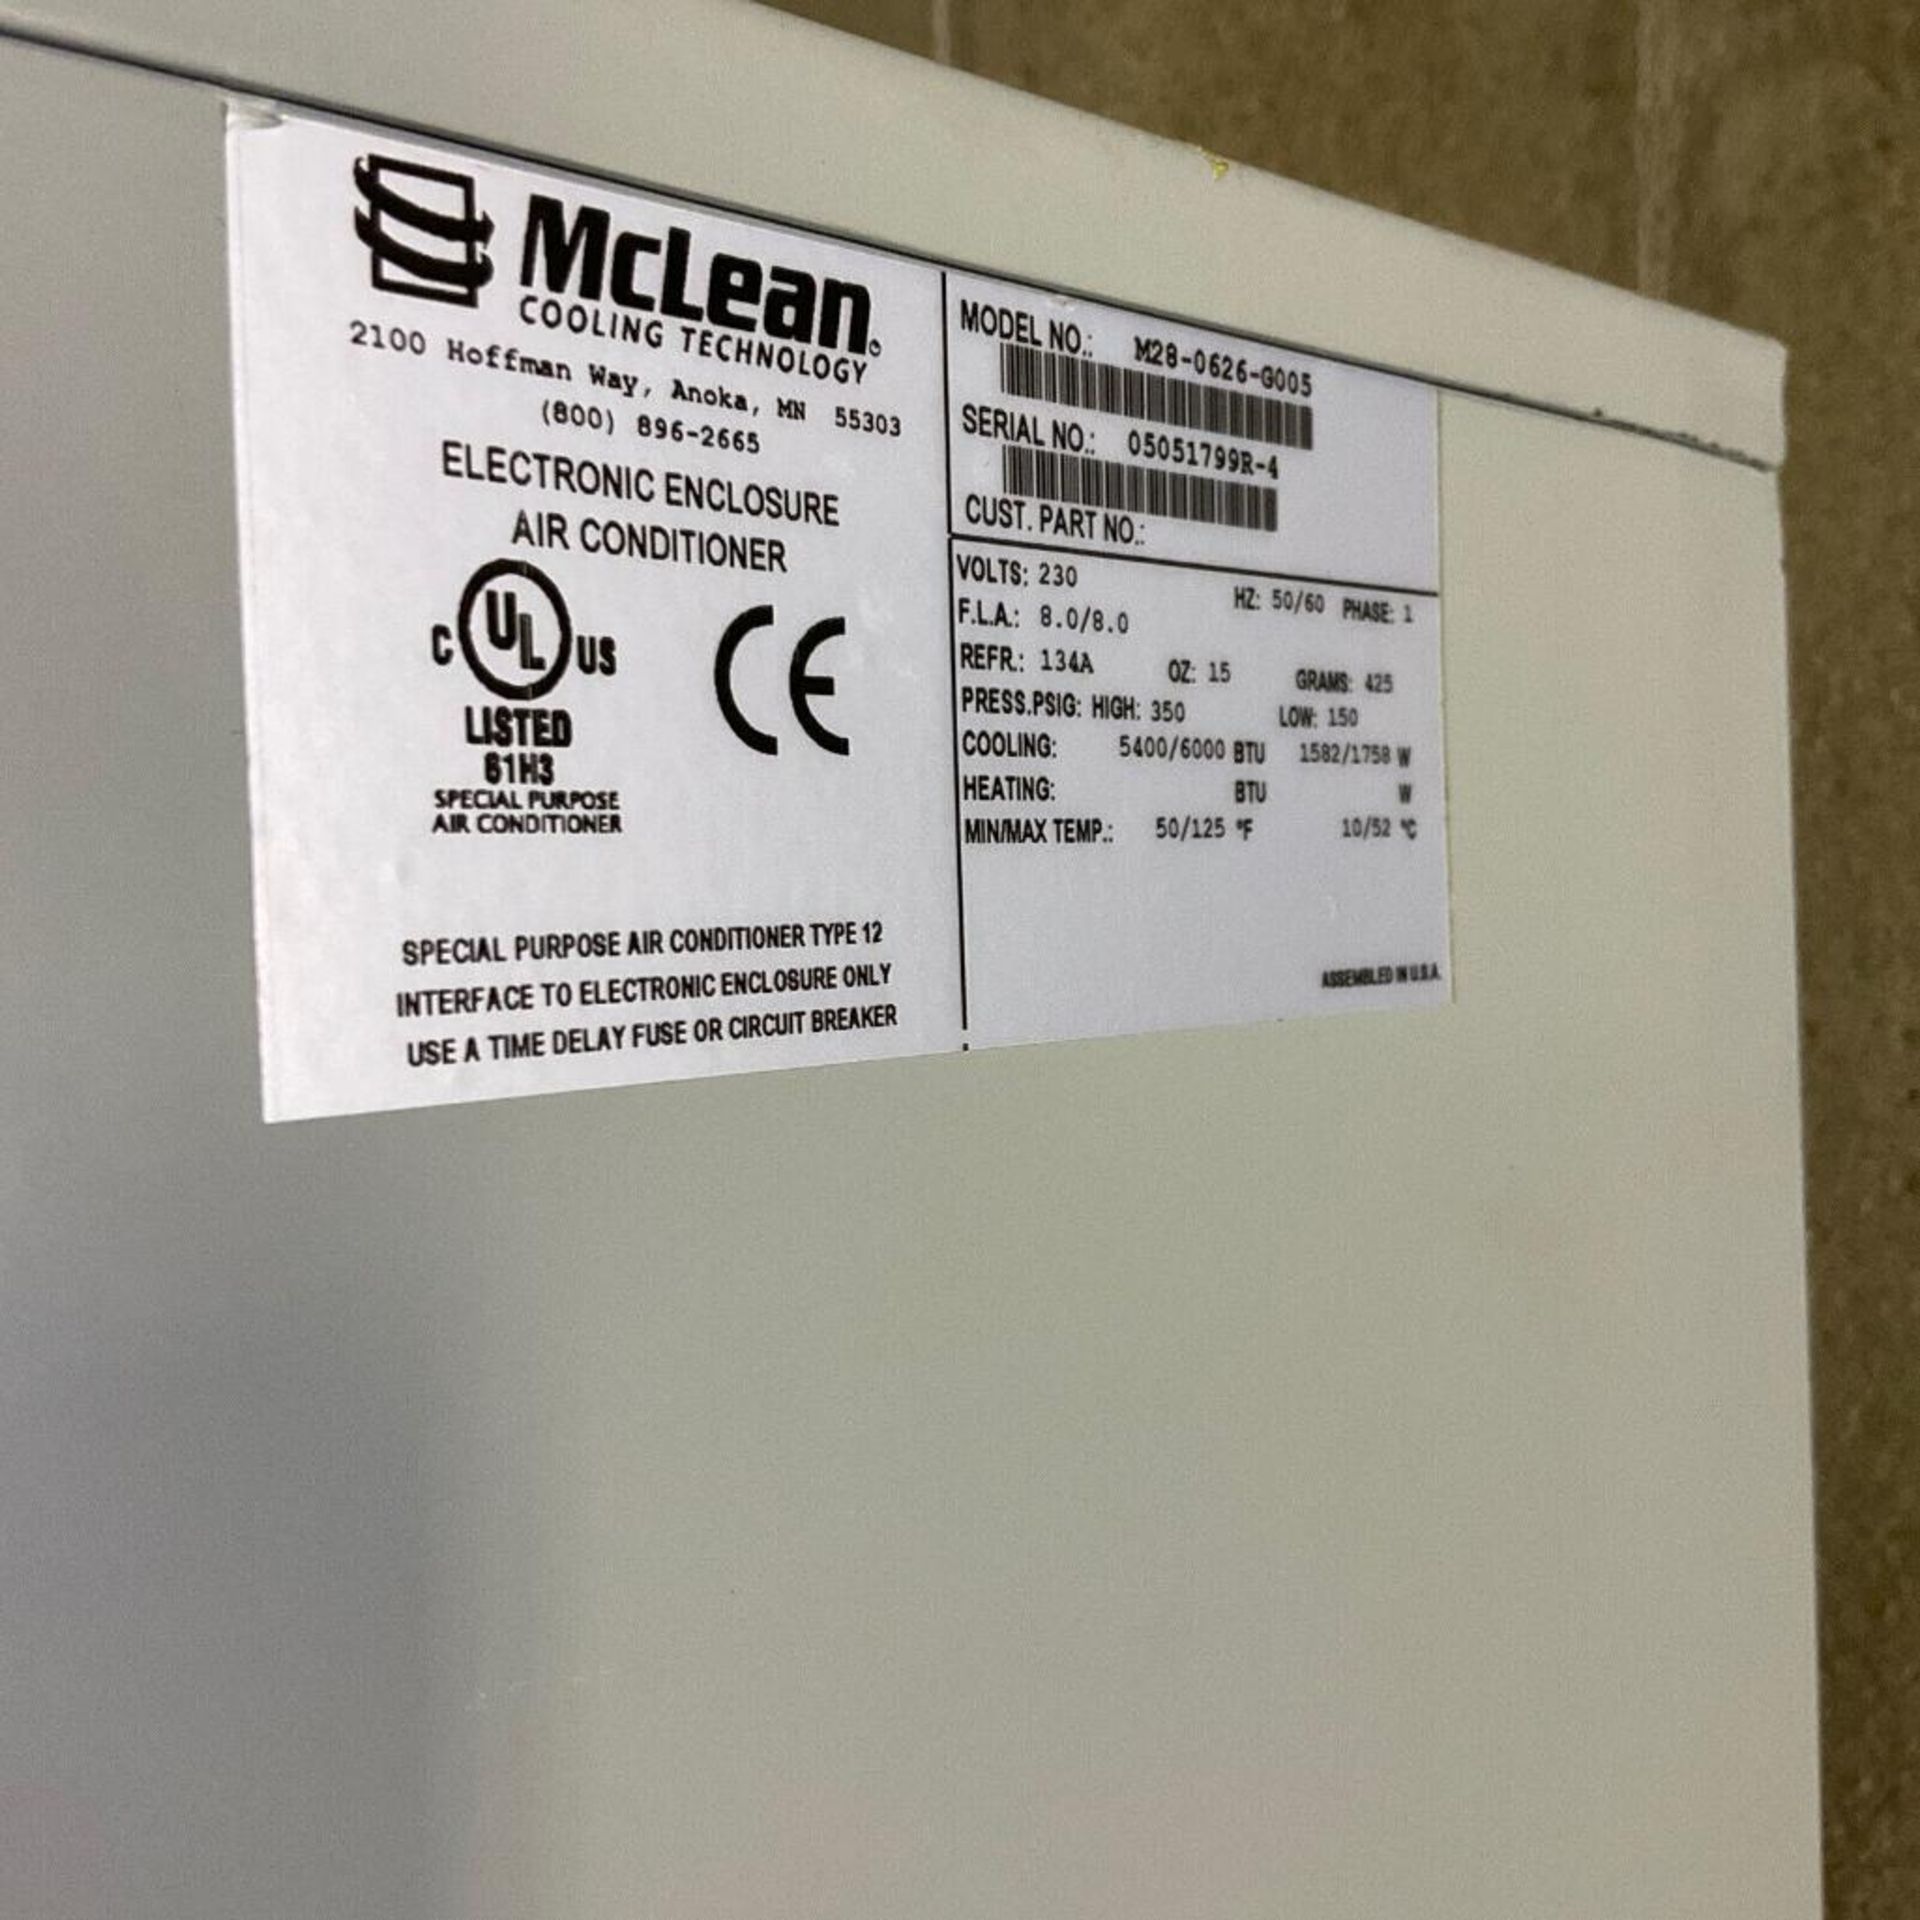 HOFFMAN M280626G005 MCLEAN ELECTRONIC ENCLOSURE AIR CONDITIONER - Image 3 of 12